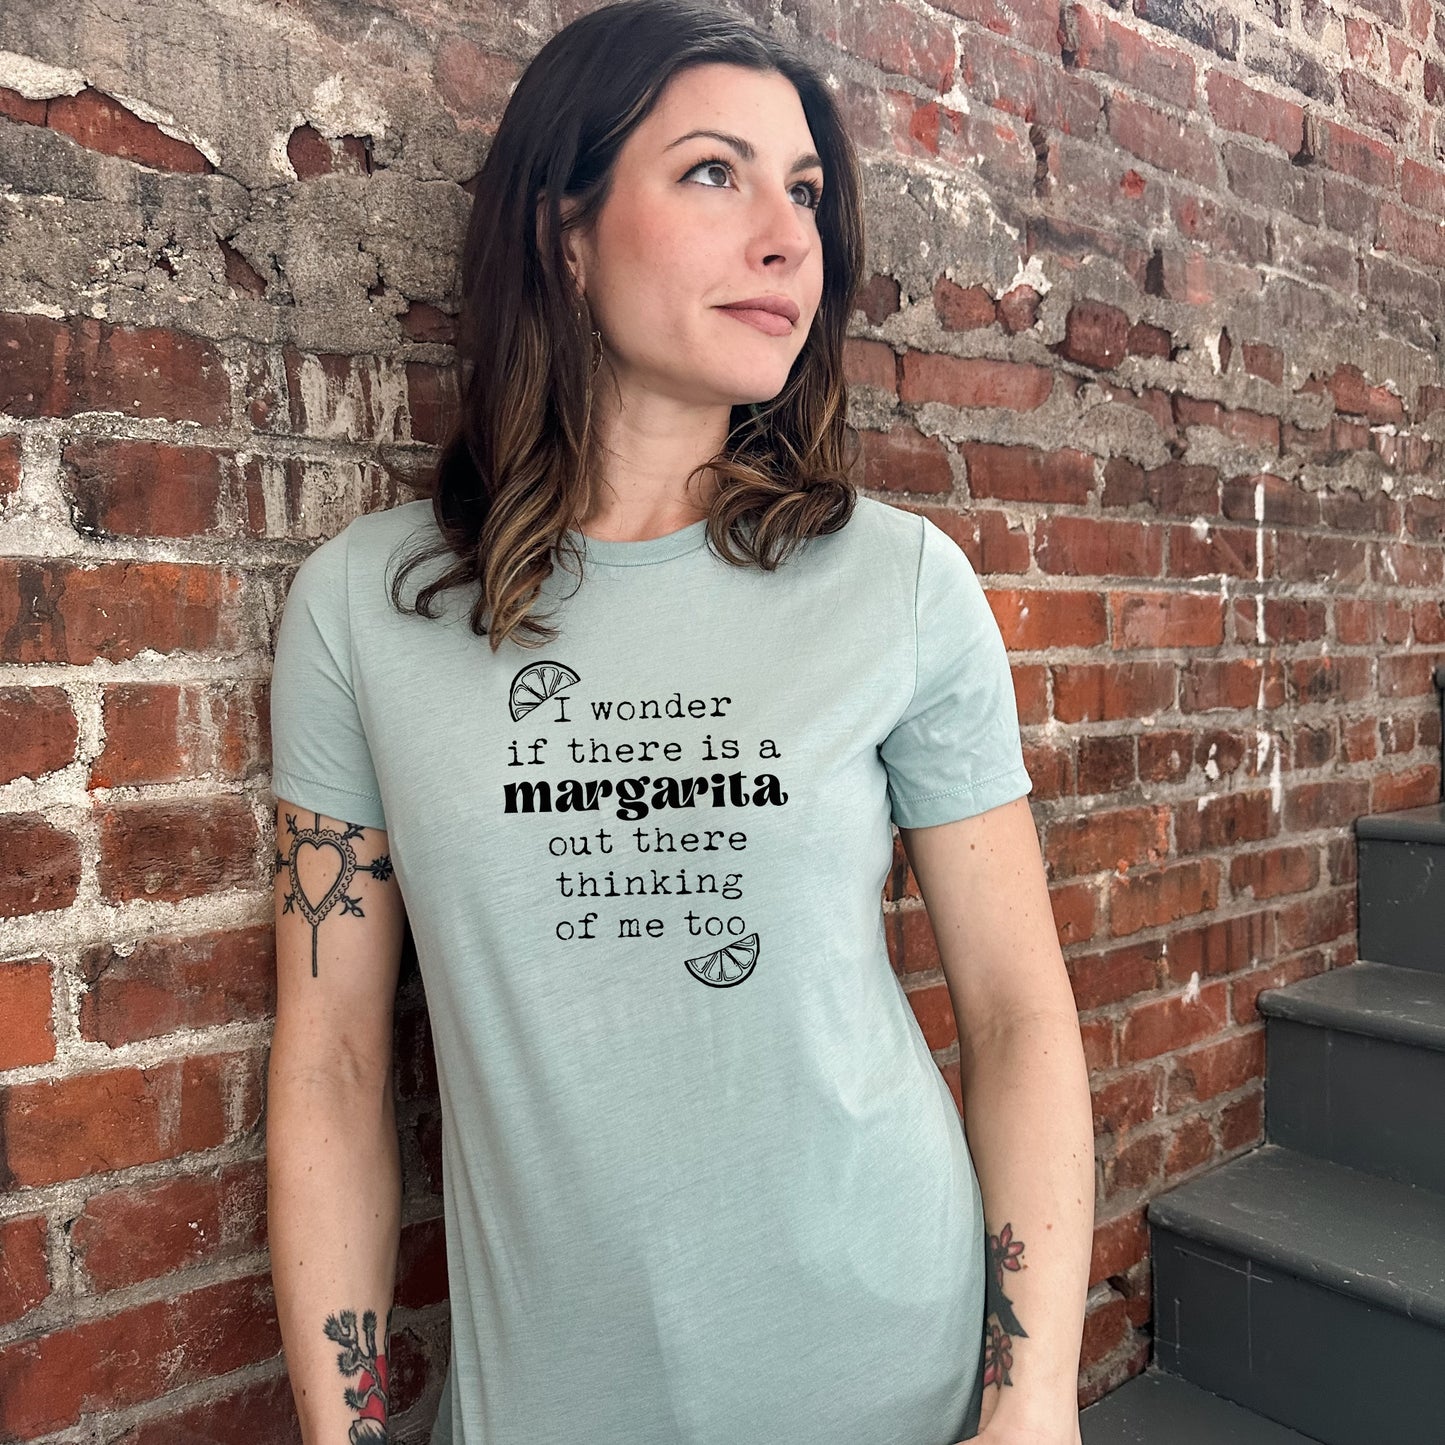 I Wonder If There Is A Margarita Out There Thinking Of Me Too - Women's Crew Tee - Olive or Dusty Blue